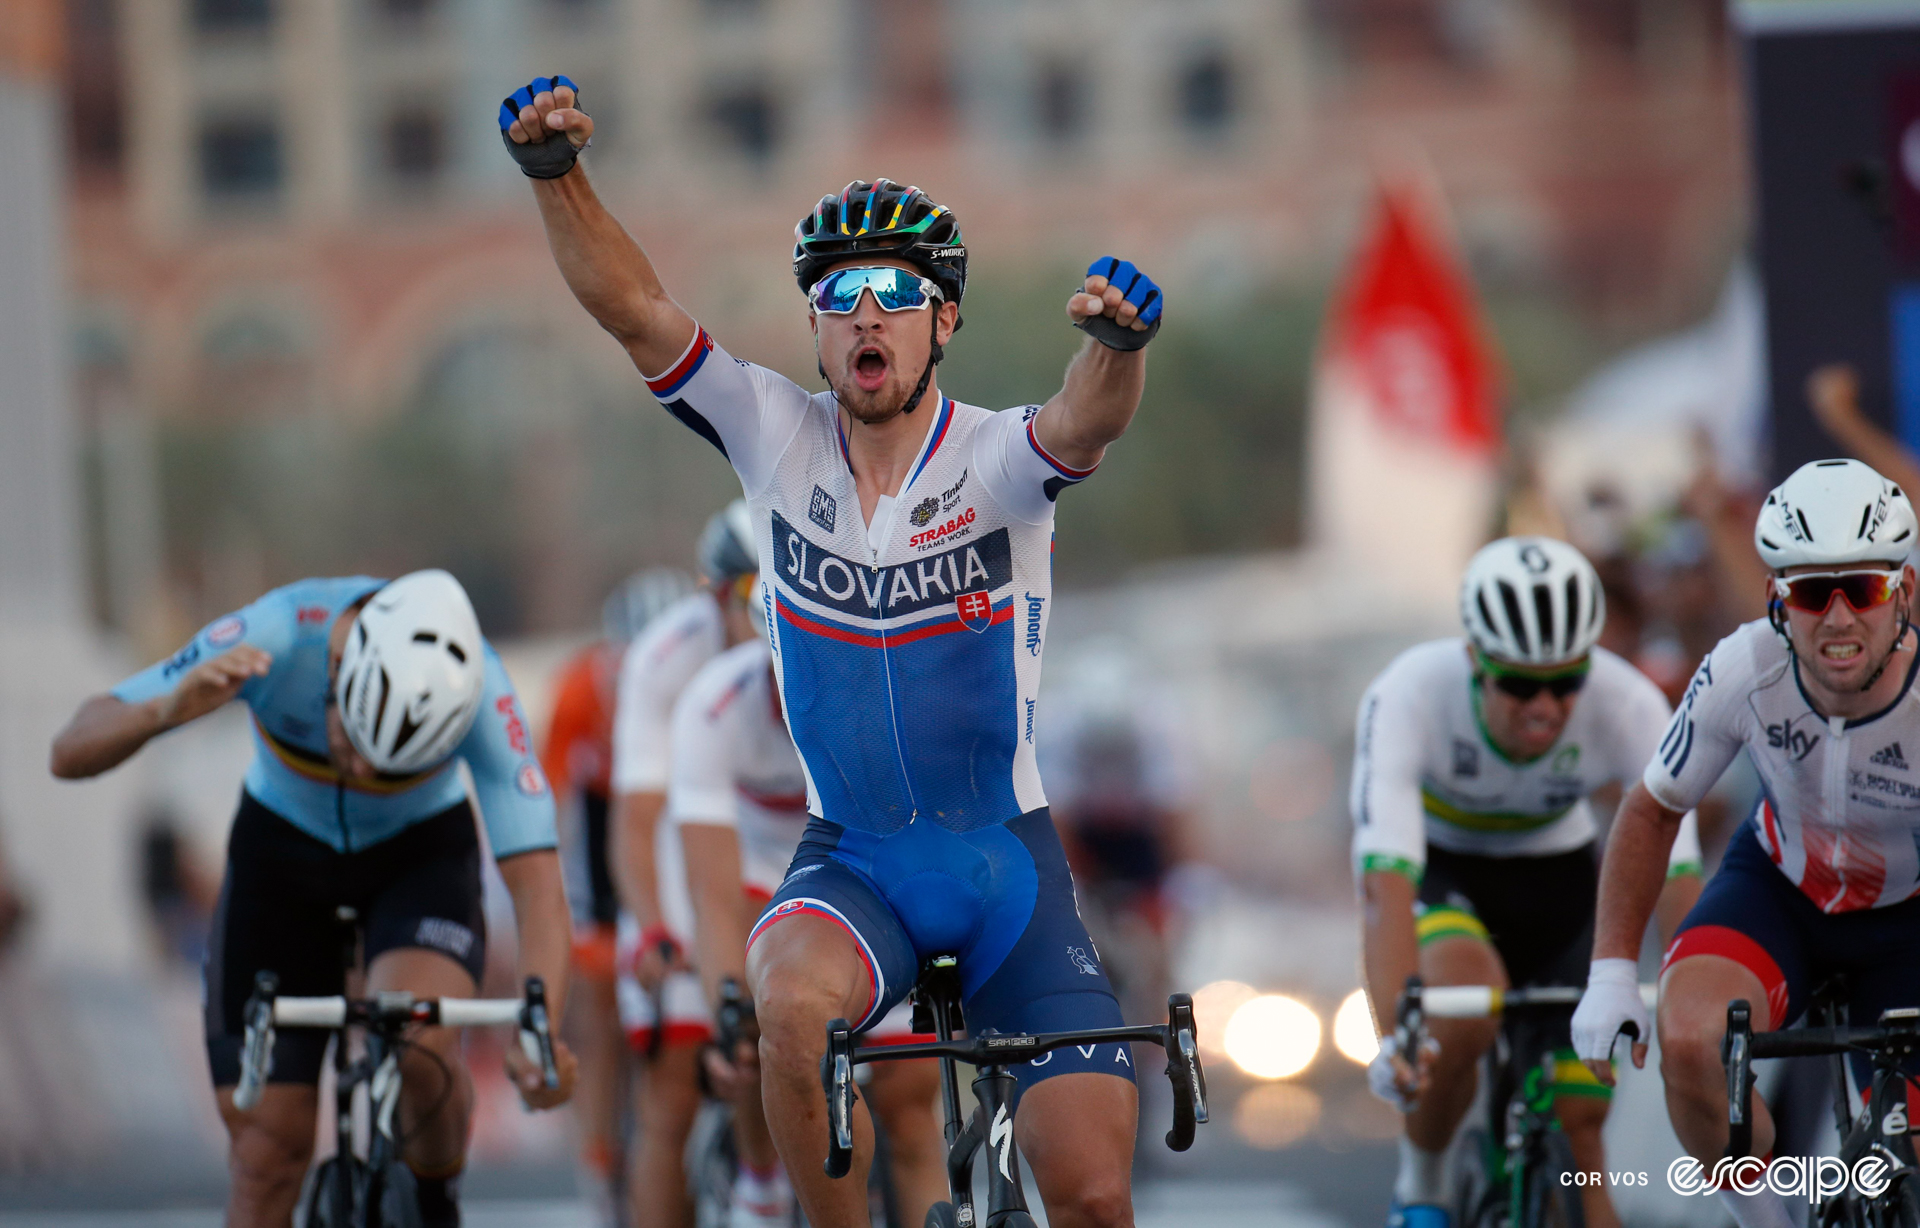 Peter Sagan celebrates winning the 2016 Road World Championships in a bunch sprint in Doha.